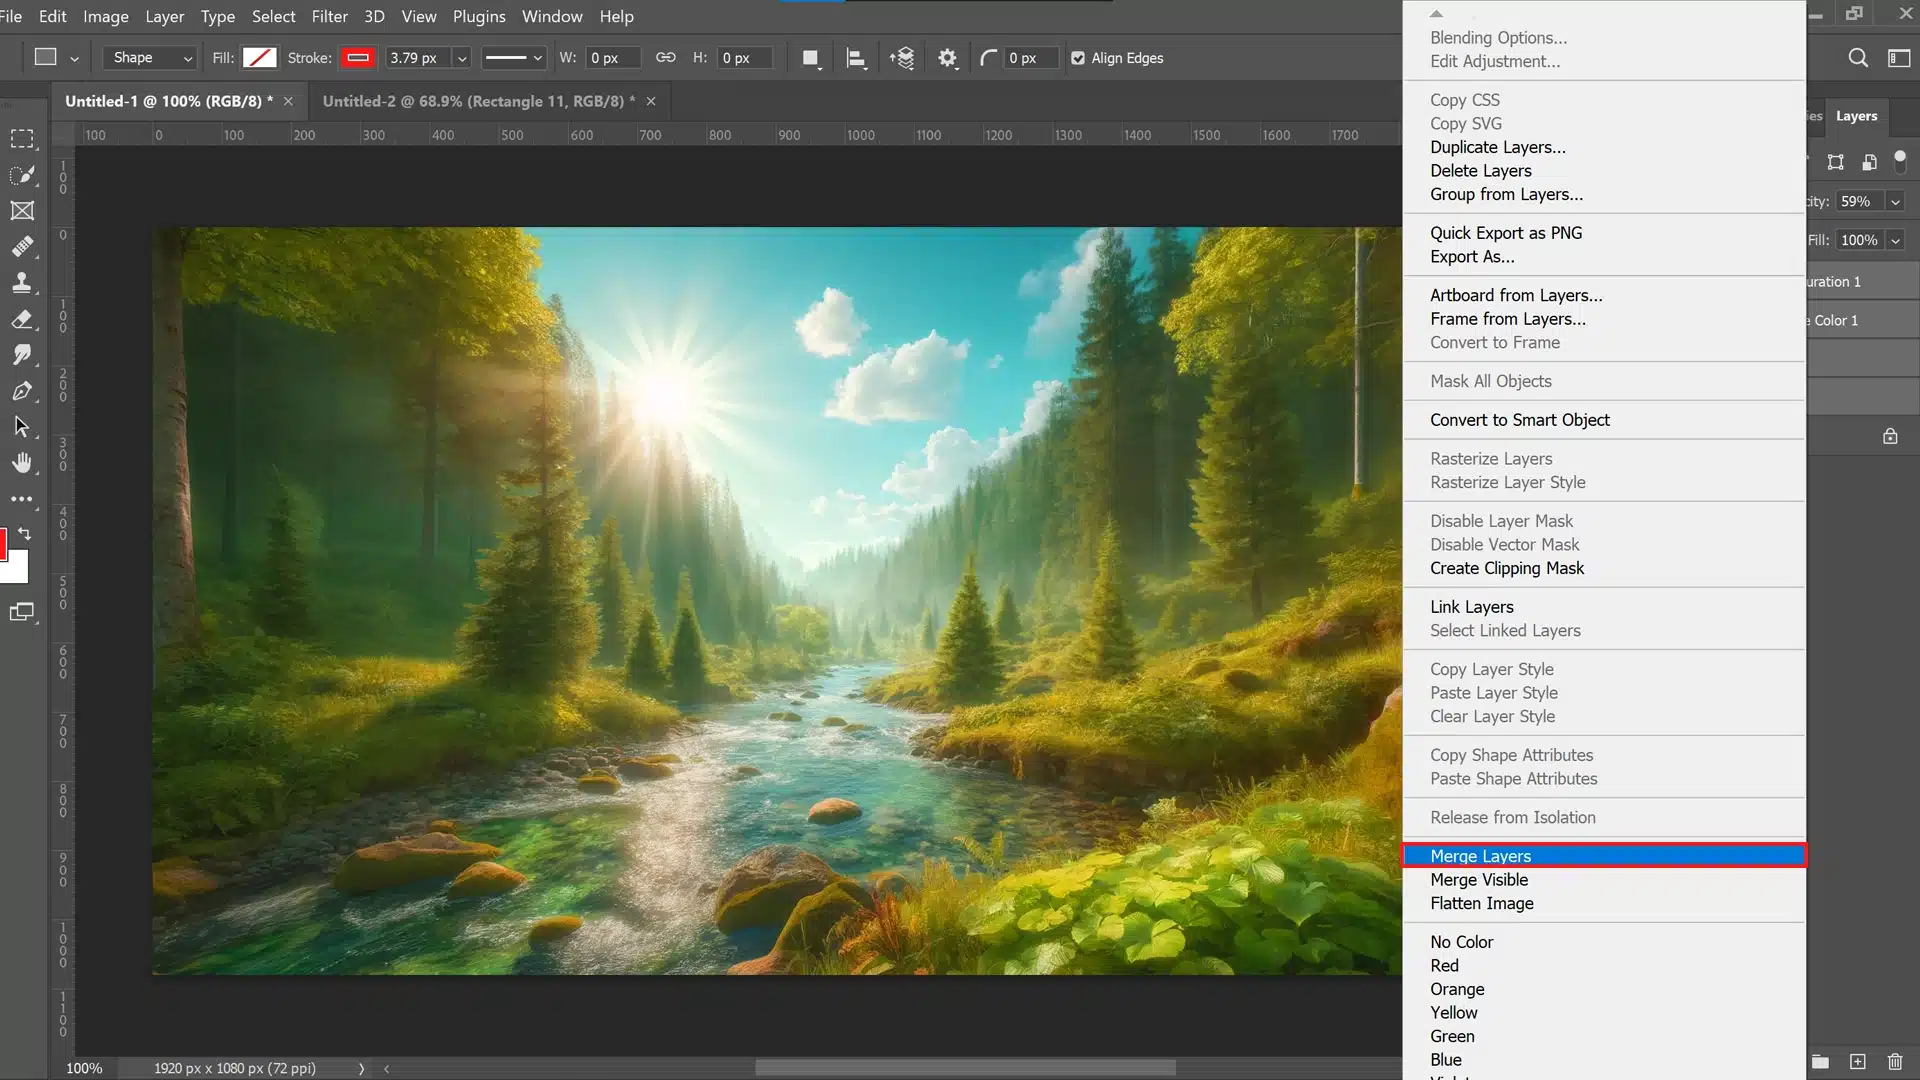 A photo of Adobe Photoshop with a forest landscape on the canvas. The Layers menu is open, and 'Merge Layers' is highlighted.